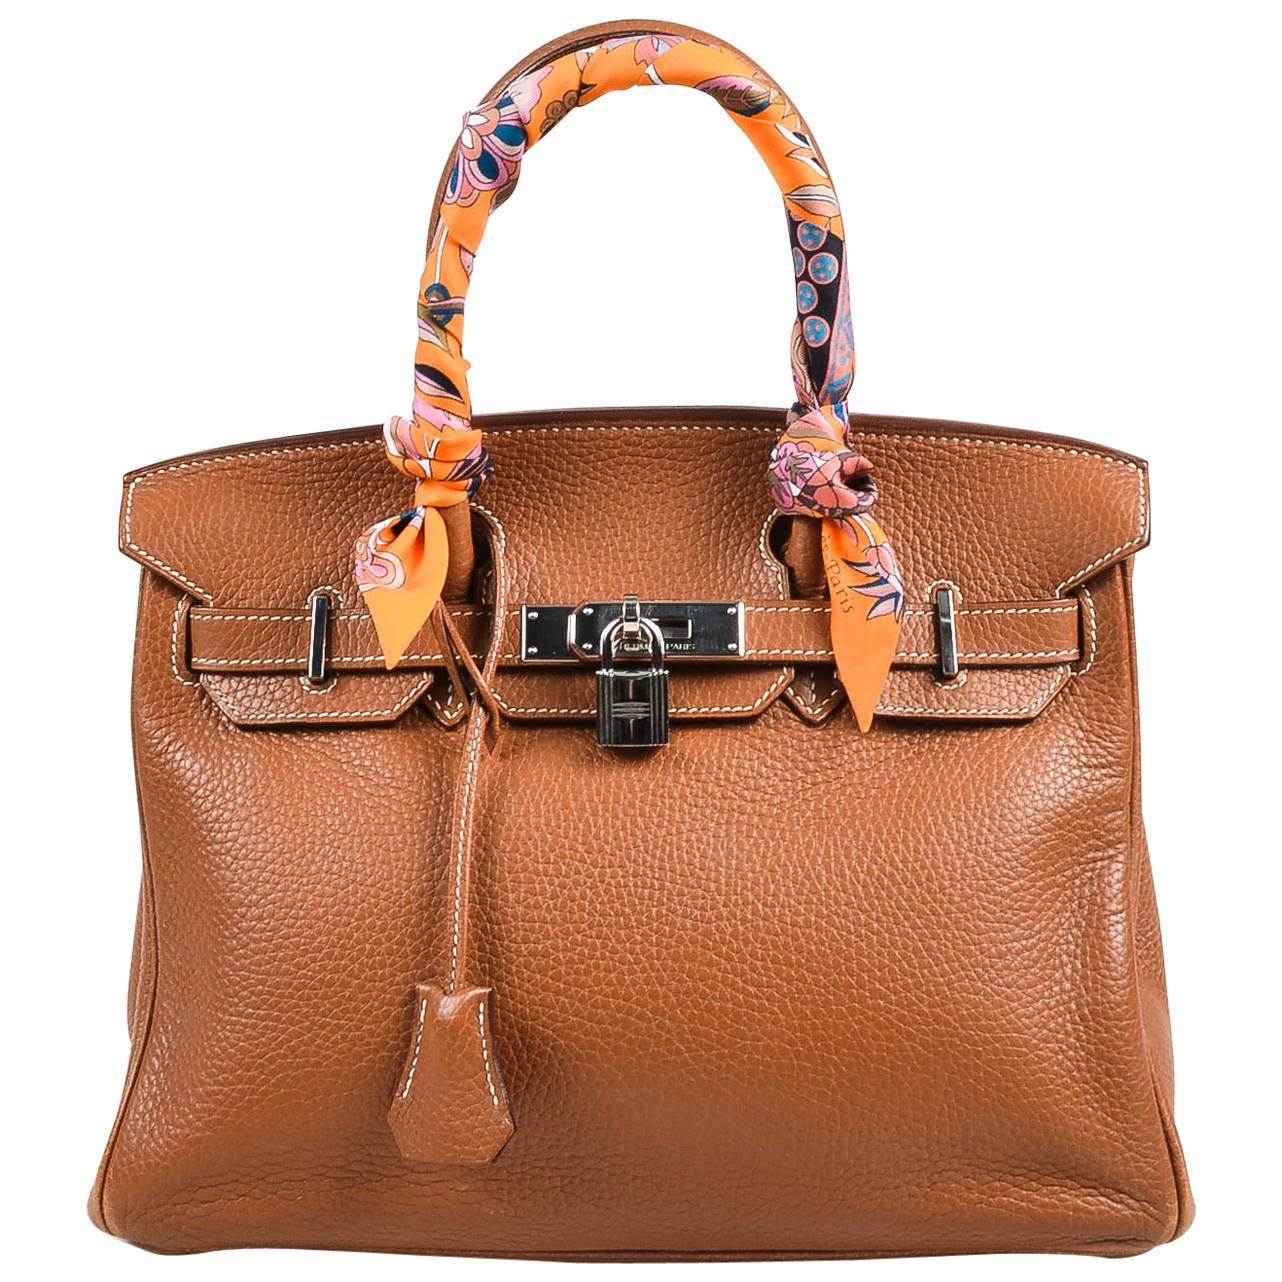 Hermes "Gold" Brown Clemence Grained Leather "Birkin" 30cm Bag & "Twilly" Scarf For Sale